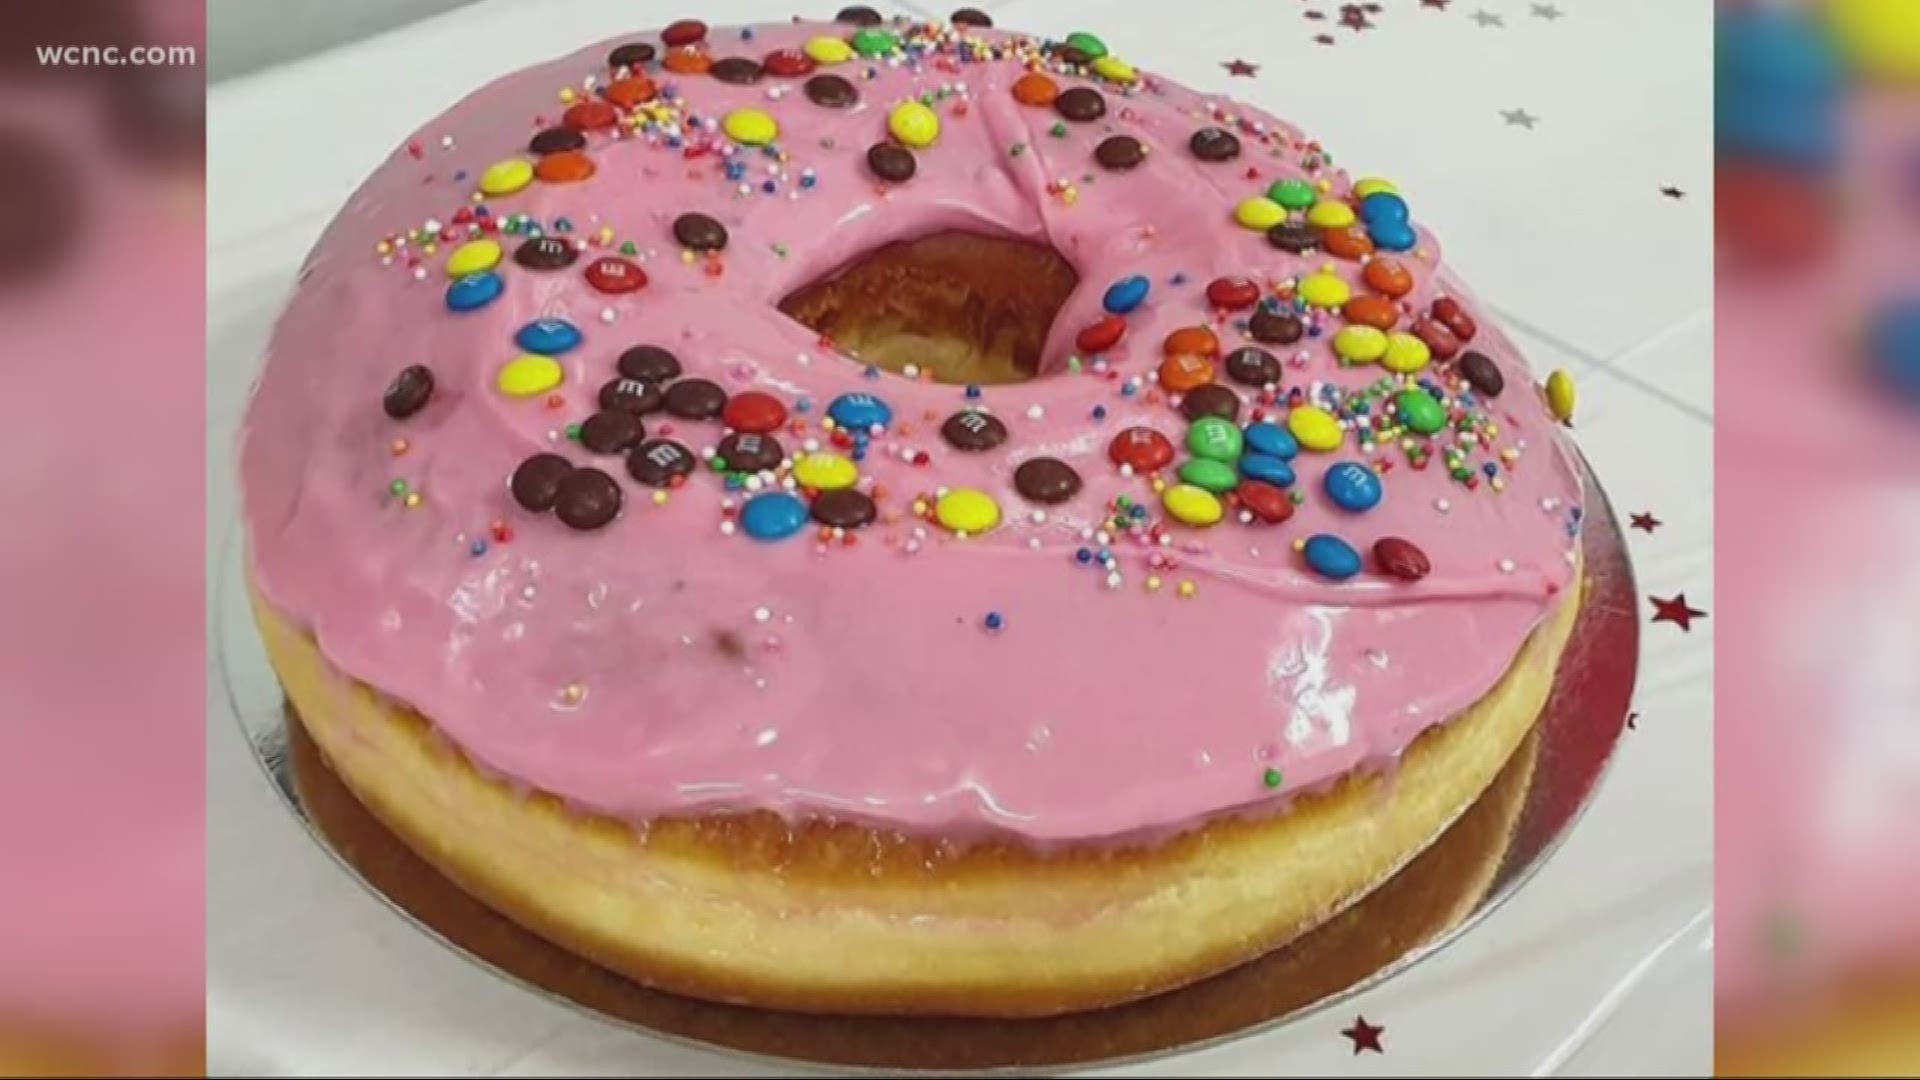 Who's hungry? Costco just announced they will be selling a giant two-pound doughnut covered in frosting and candy. But you'll have to go to Australia to get it.